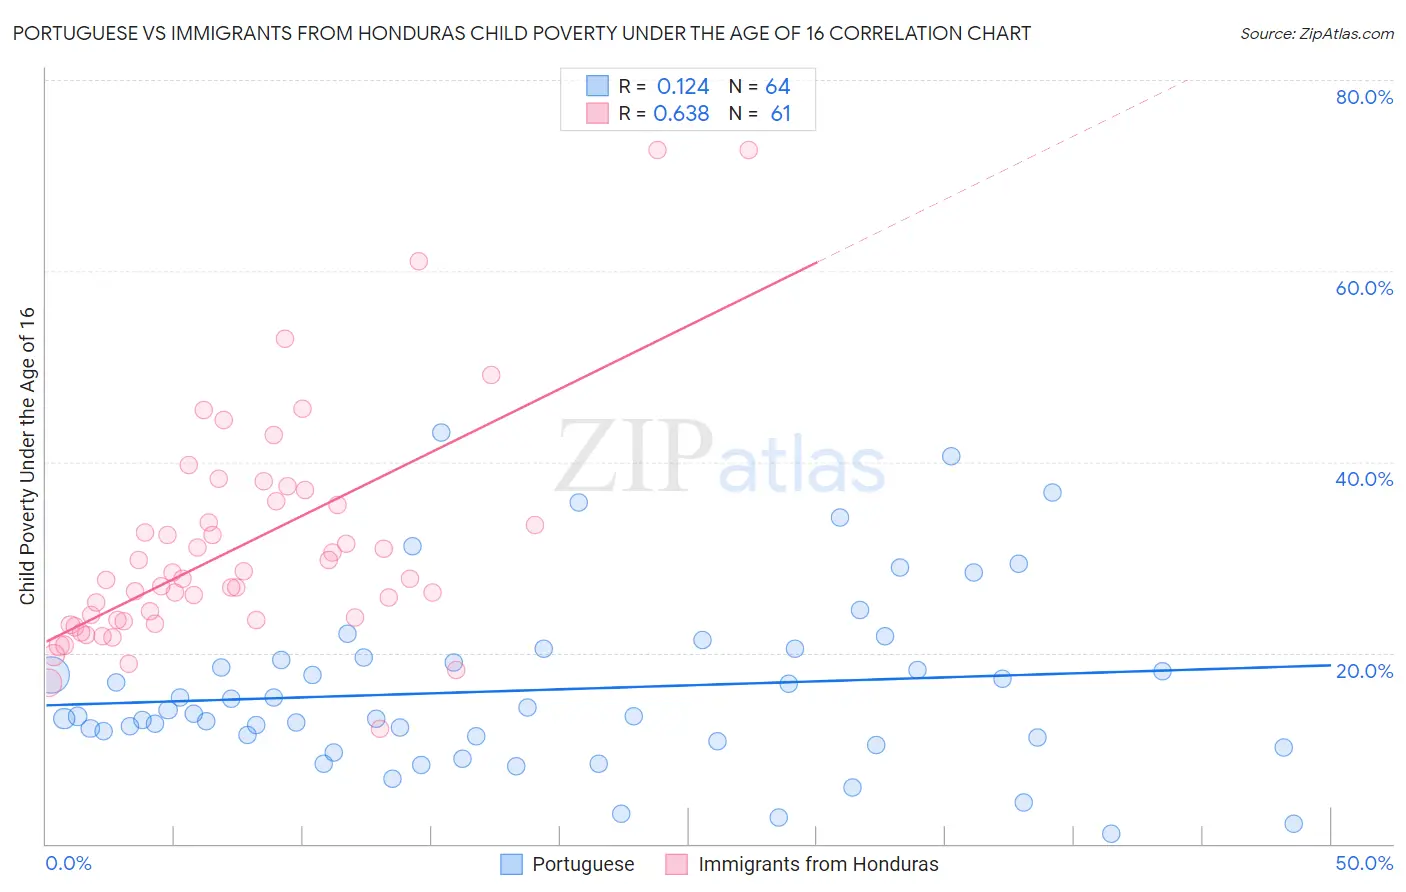 Portuguese vs Immigrants from Honduras Child Poverty Under the Age of 16